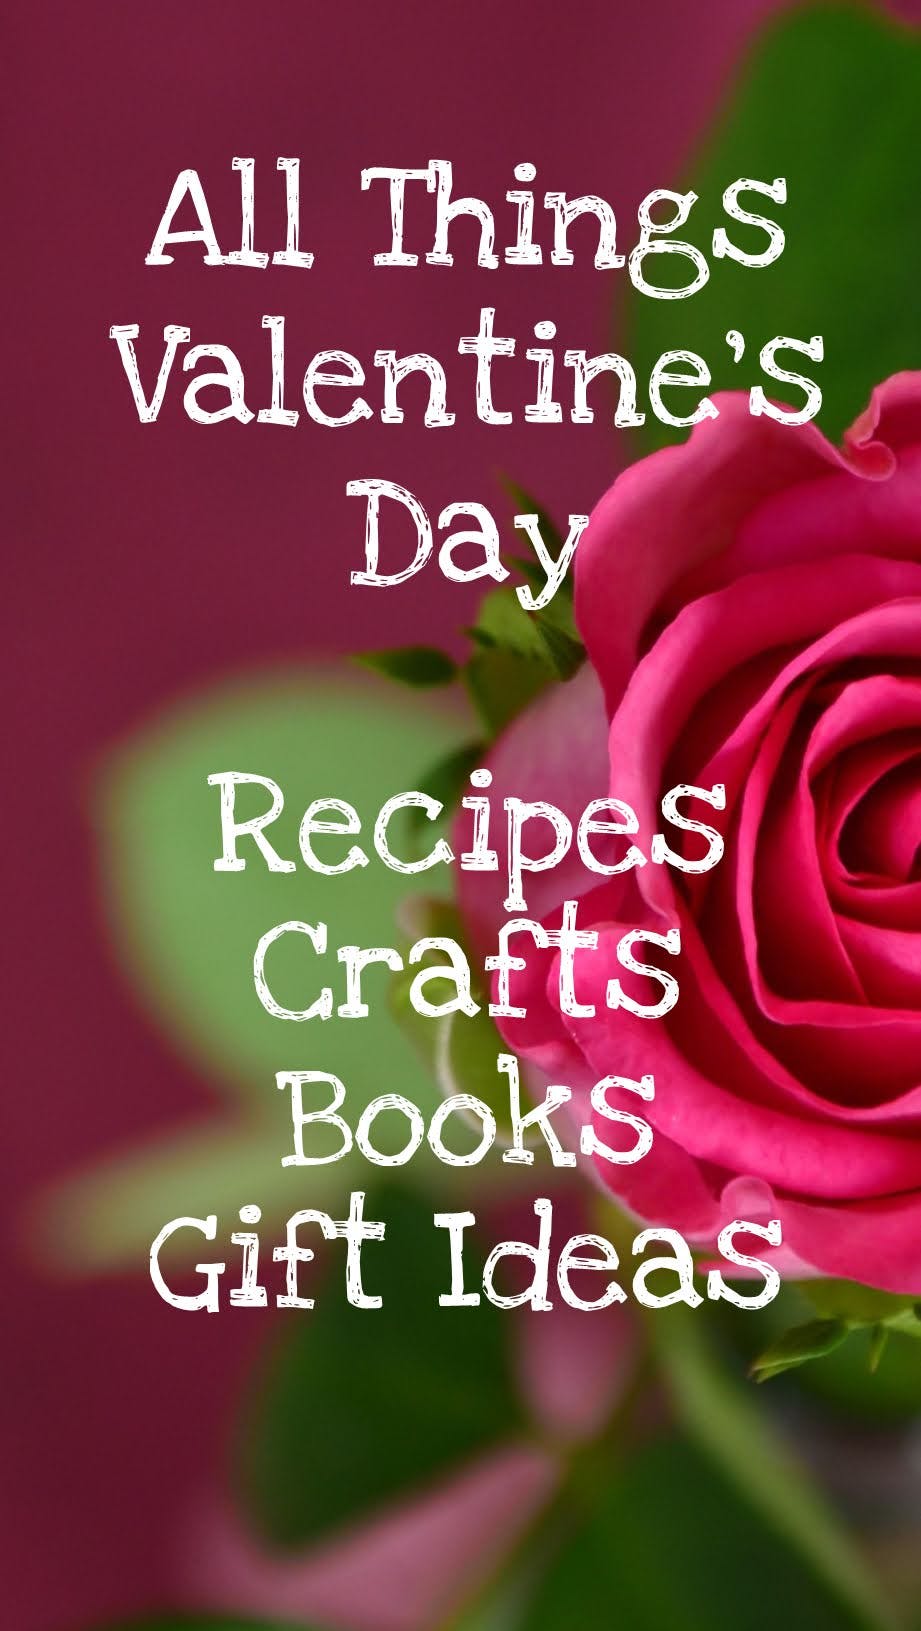 All Things Valentine's